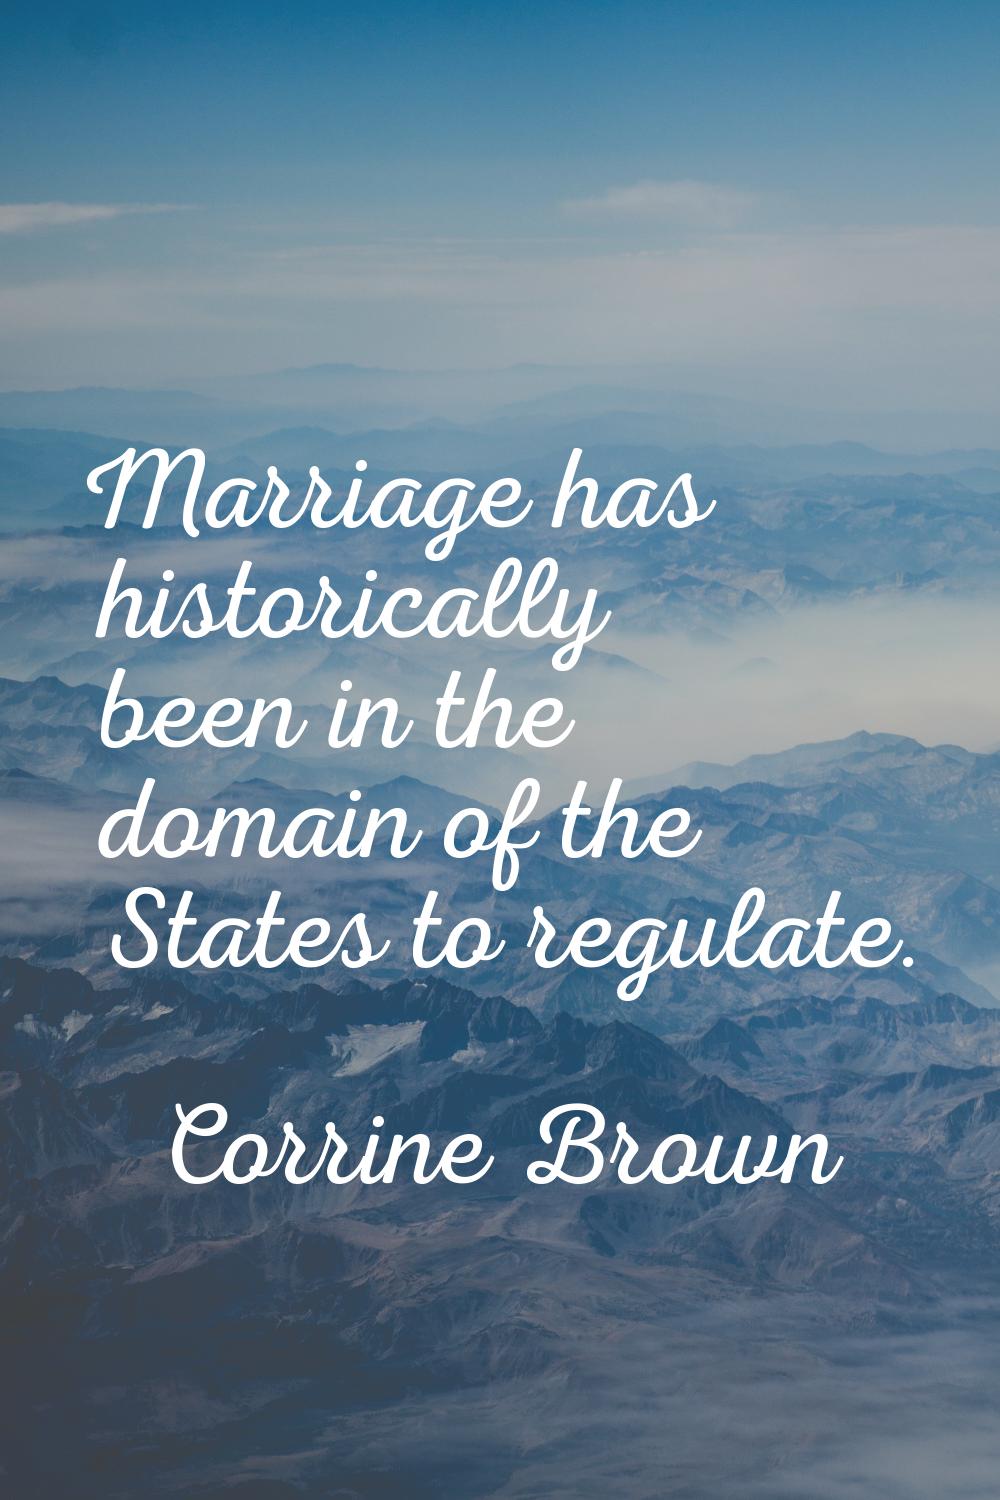 Marriage has historically been in the domain of the States to regulate.